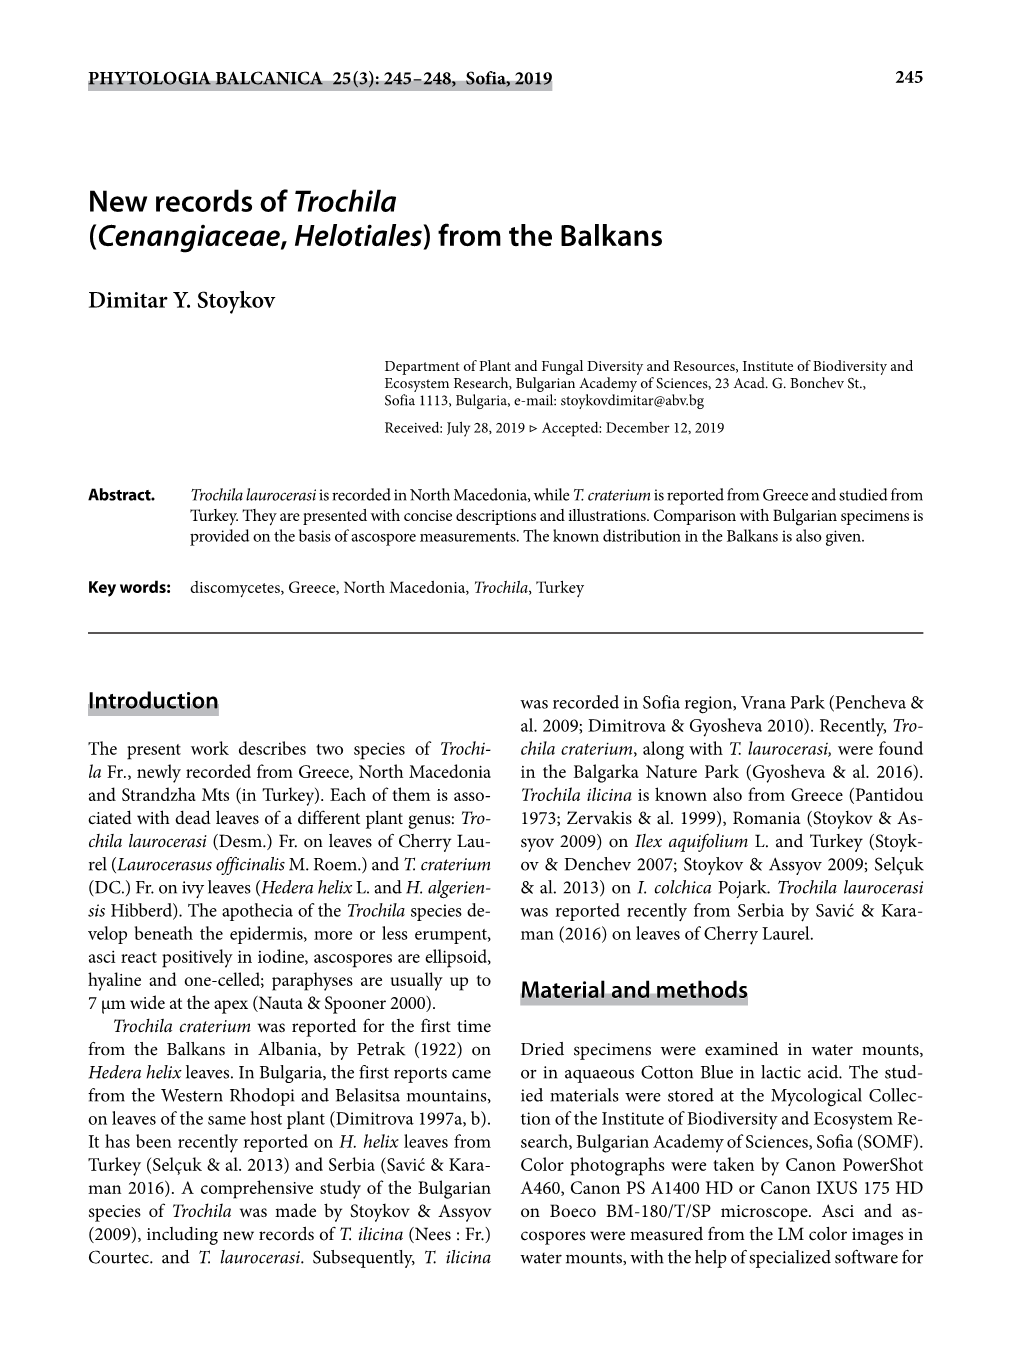 New Records of Trochila (Cenangiaceae, Helotiales) from the Balkans